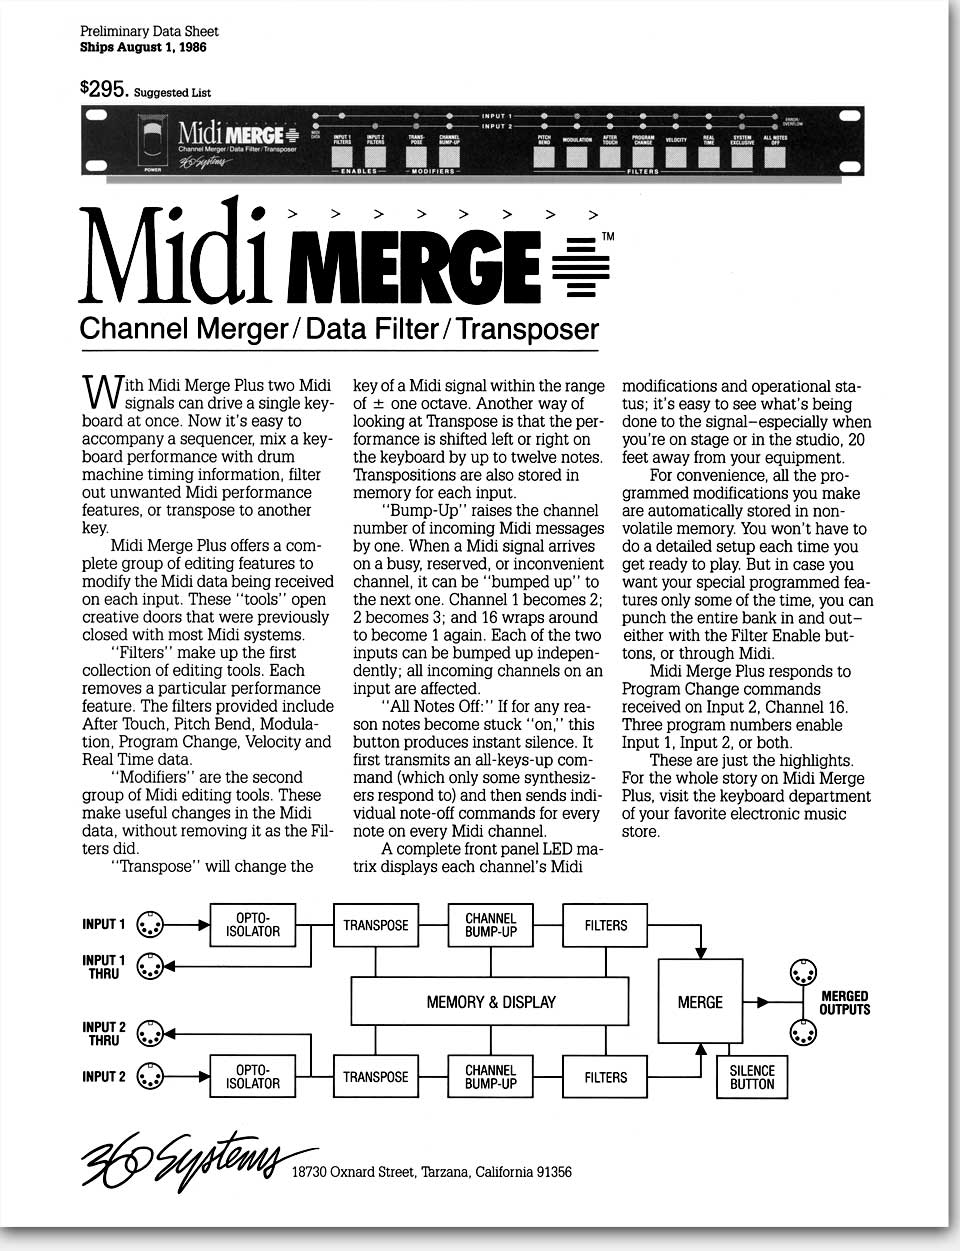 Original data sheet for Midi Merge Plus by 360 Systems, mid-1980s. Eric Wrobbel Design. This channel merger, data filter, and transposer was one of the pioneering devices in the early days of Midi. More vintage gear including Midi Bass: https://www.ericwrobbel.com/art/360datasheets.htm